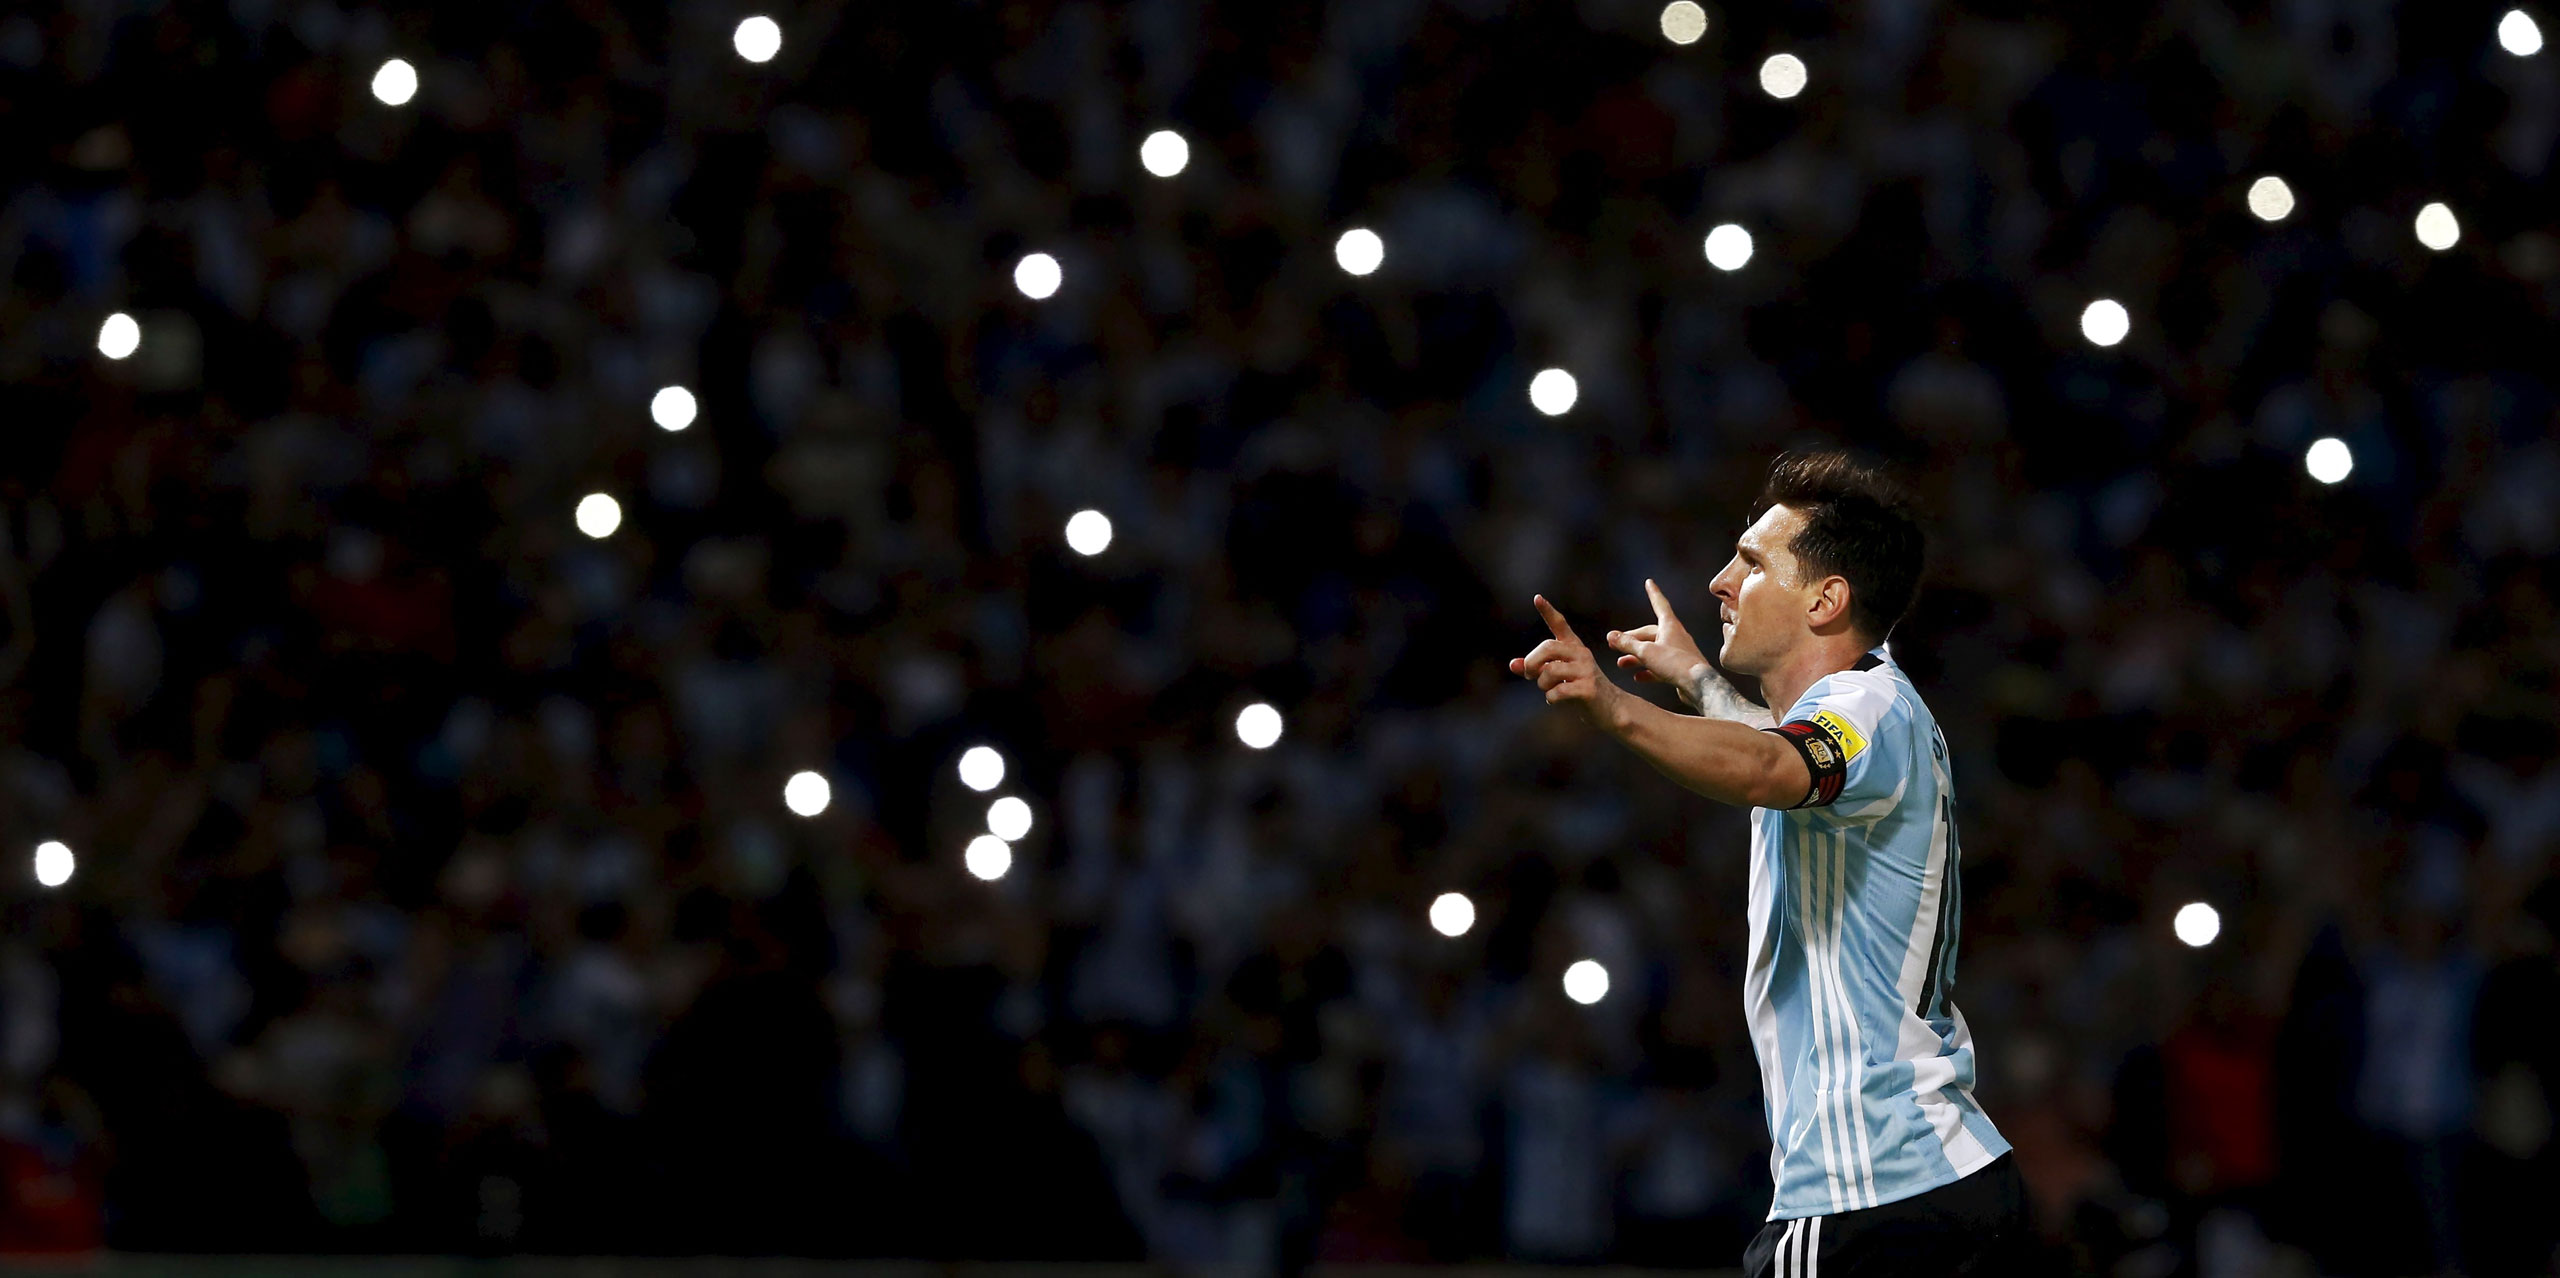 Messi celebrates after scoring a goal for Argentina in a March 29 World Cup qualifying match against Bolivia (Enrique Marcarian—REUTERS)